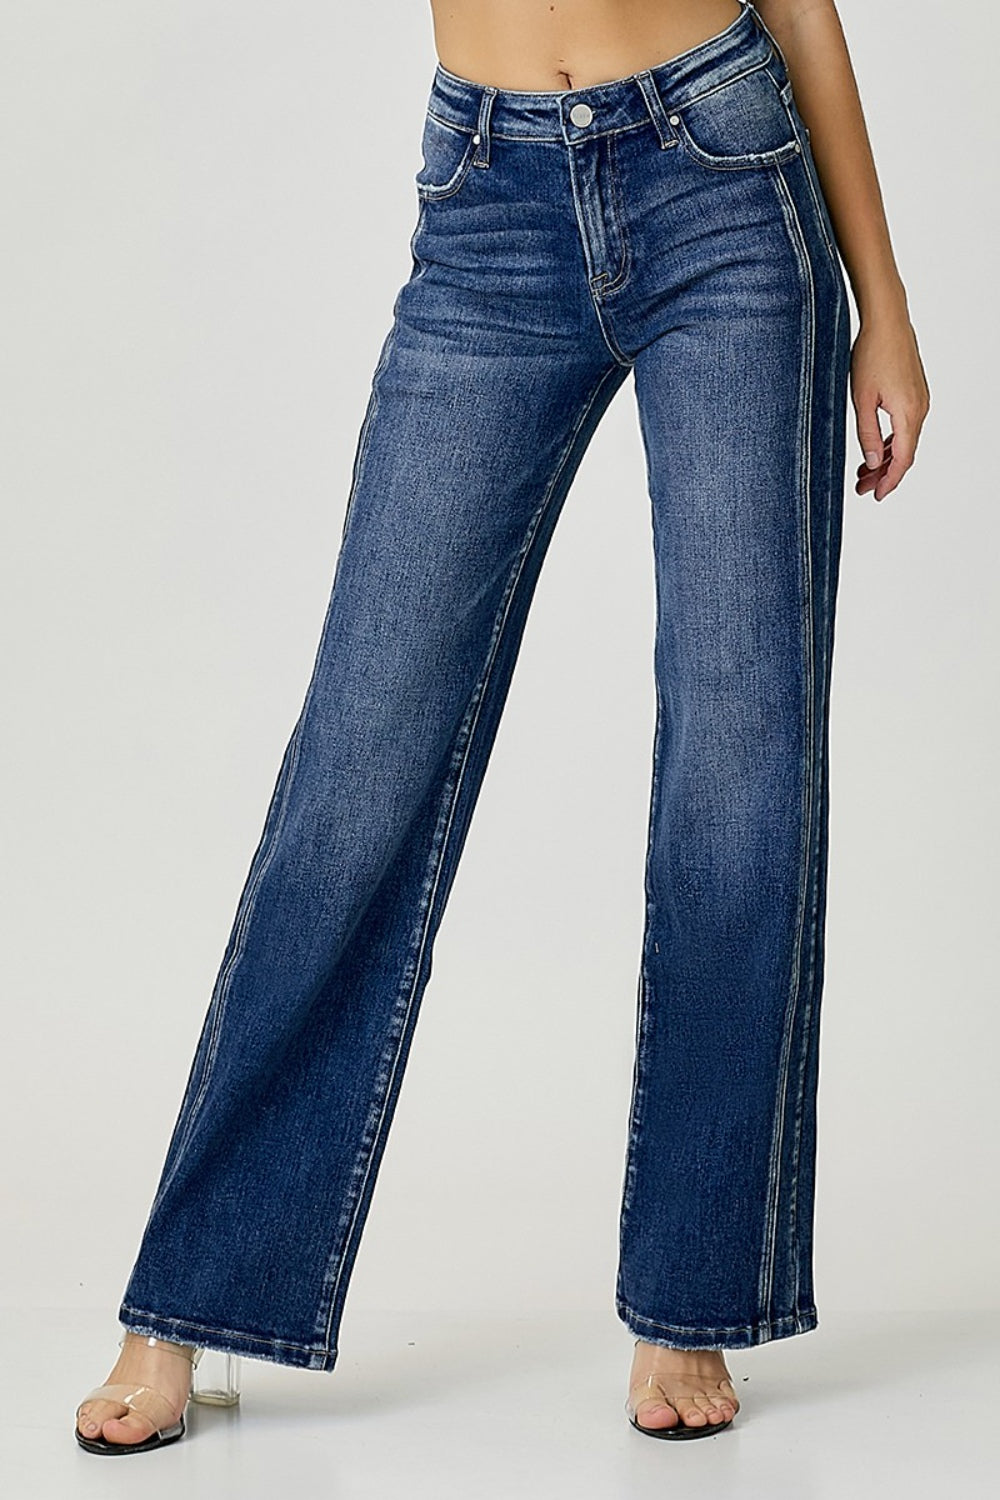 Classic Blue Mid Rise Straight Jeans